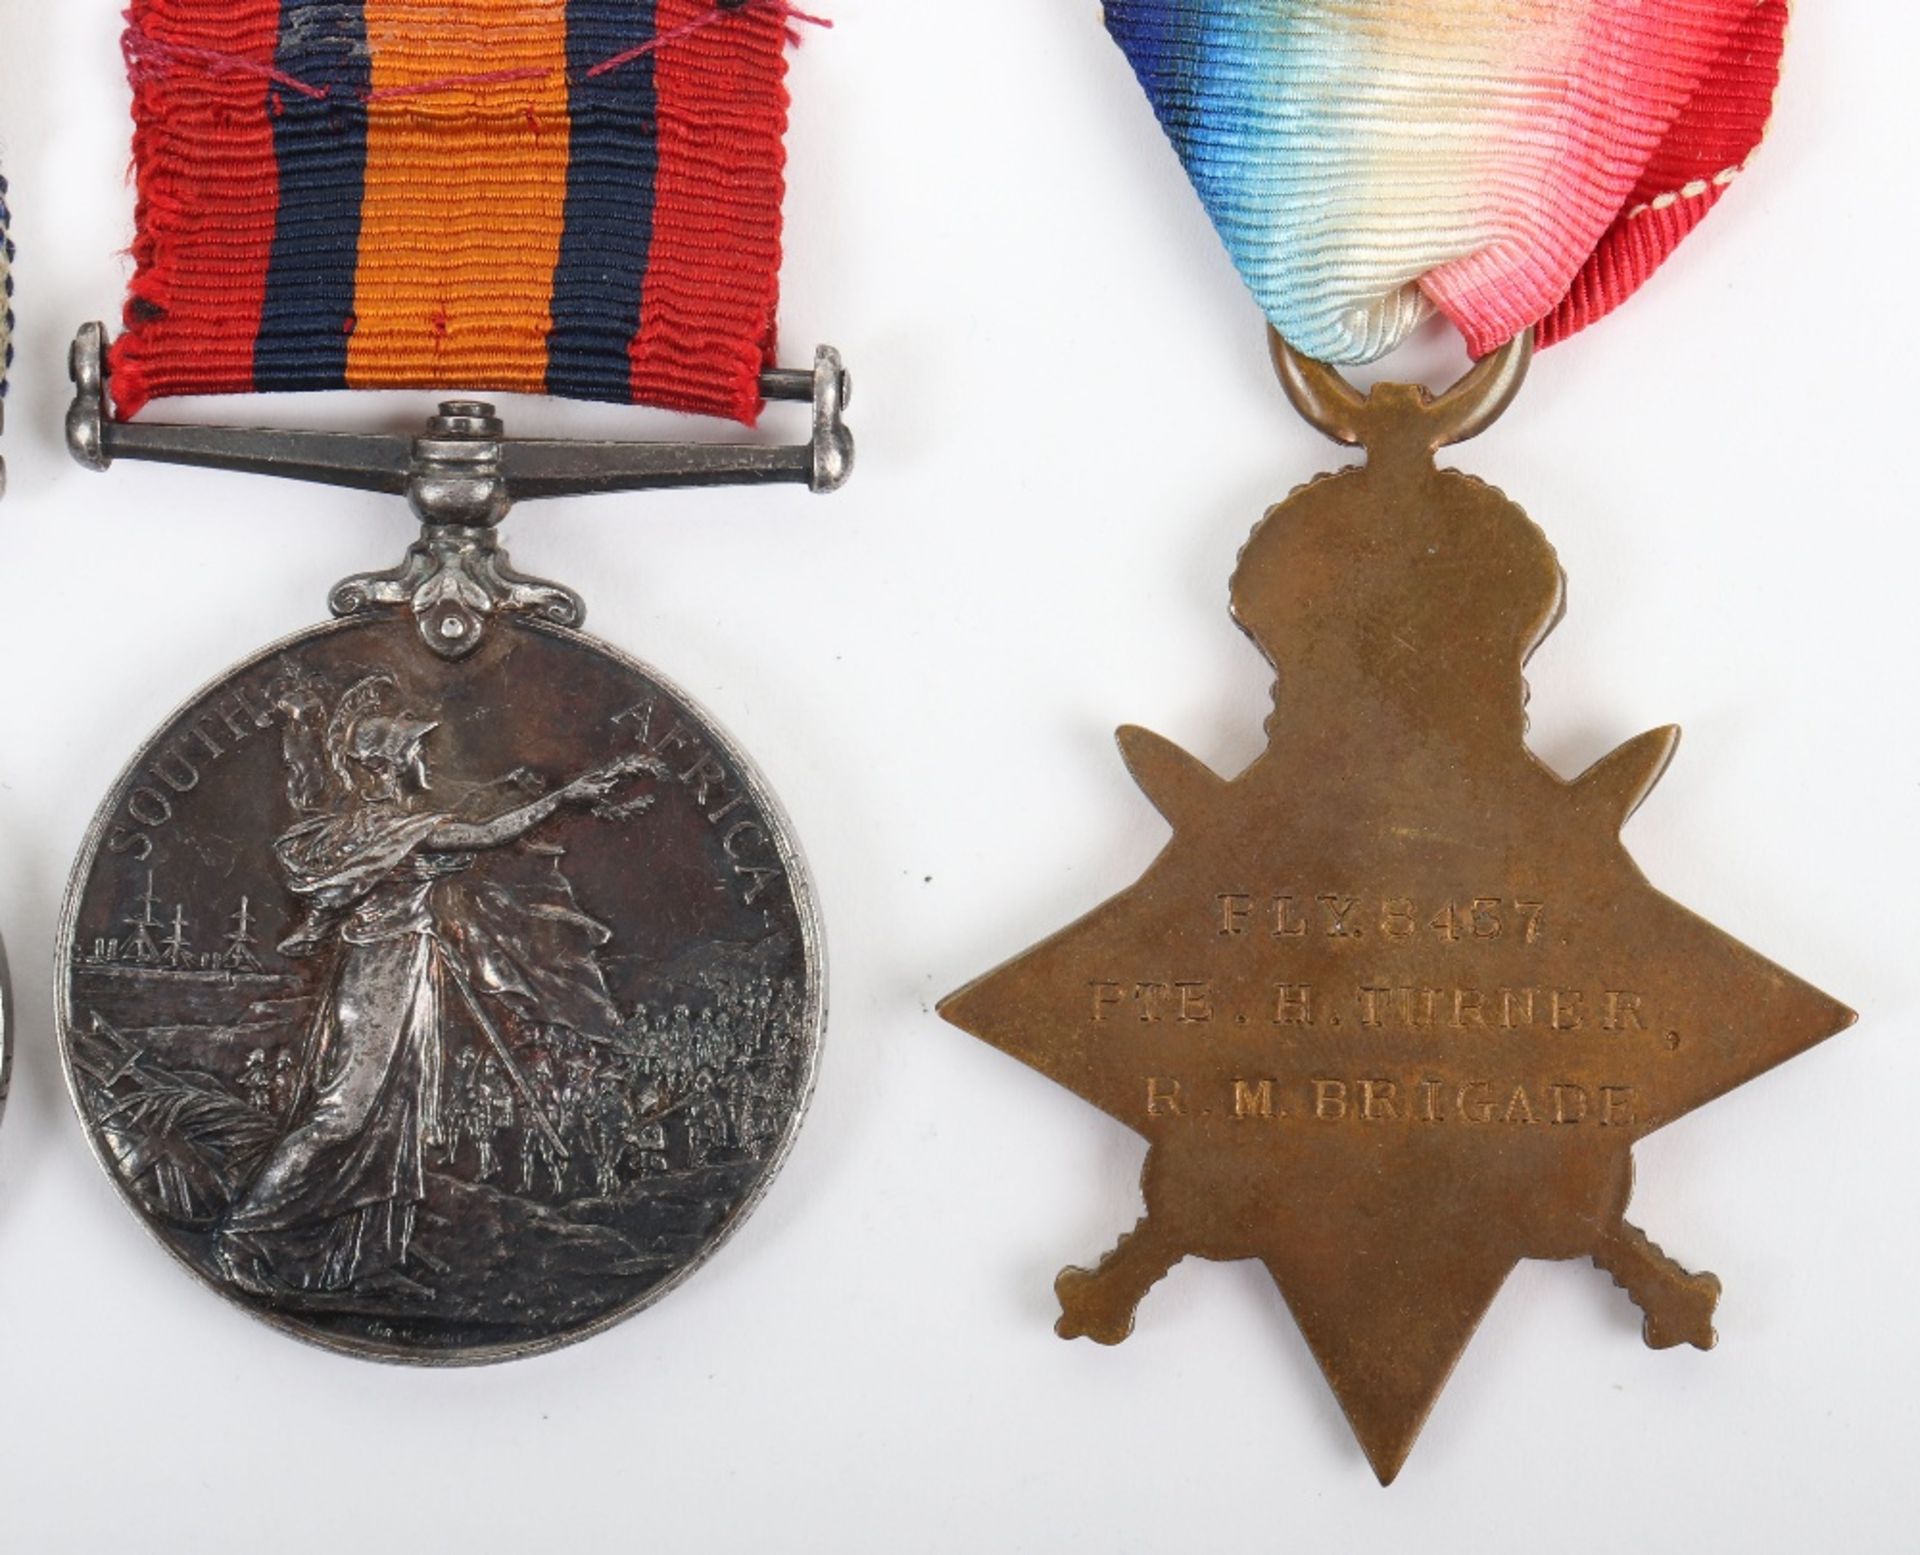 Royal Marines Light Infantry / Royal Marine Brigade Great War Casualty Medal Group of Three - Image 5 of 5